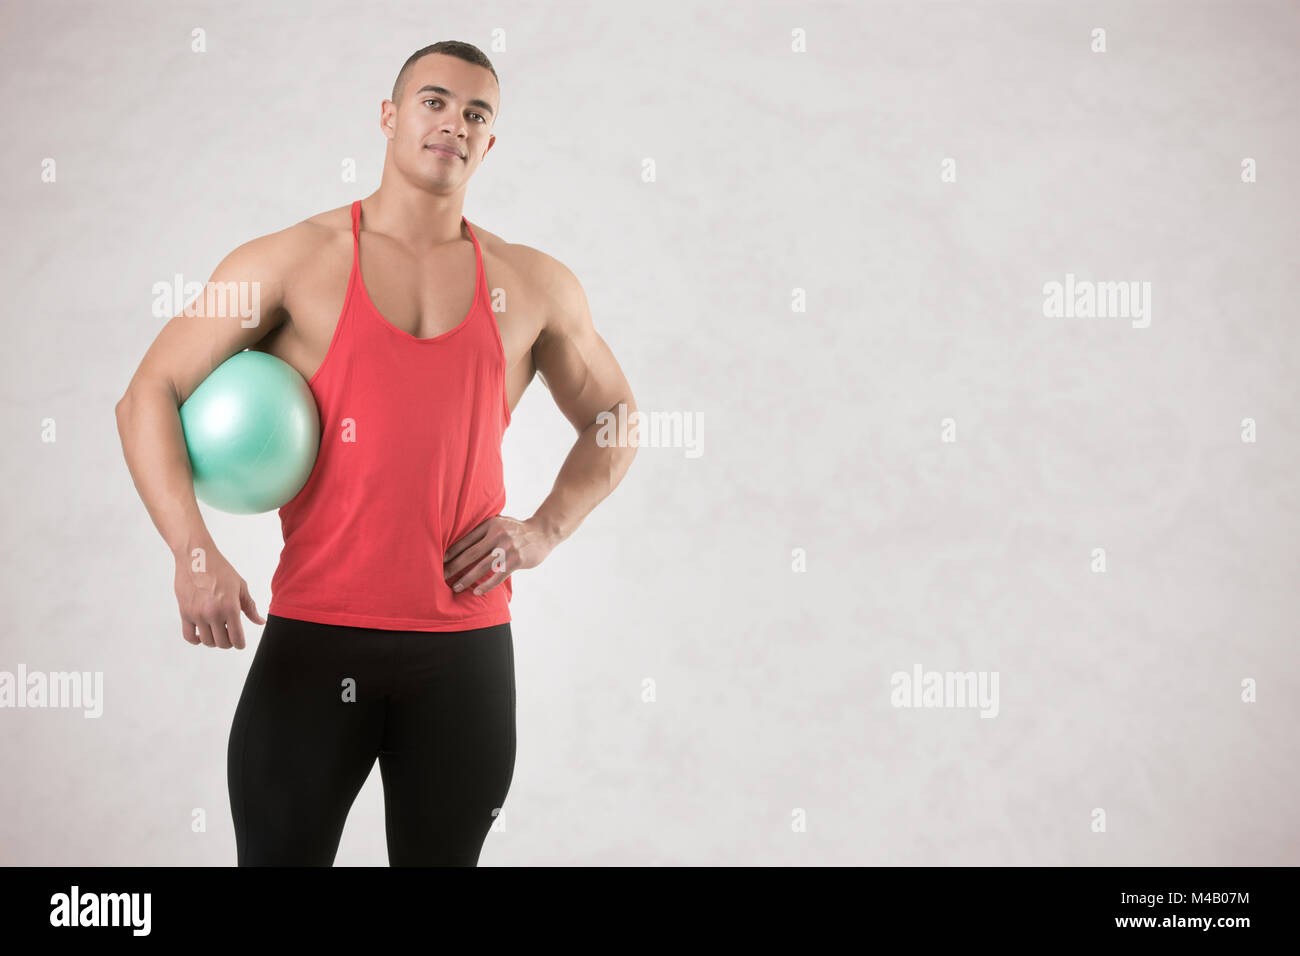 Fit Man Standing Holding a Pilates Ball Stock Photo